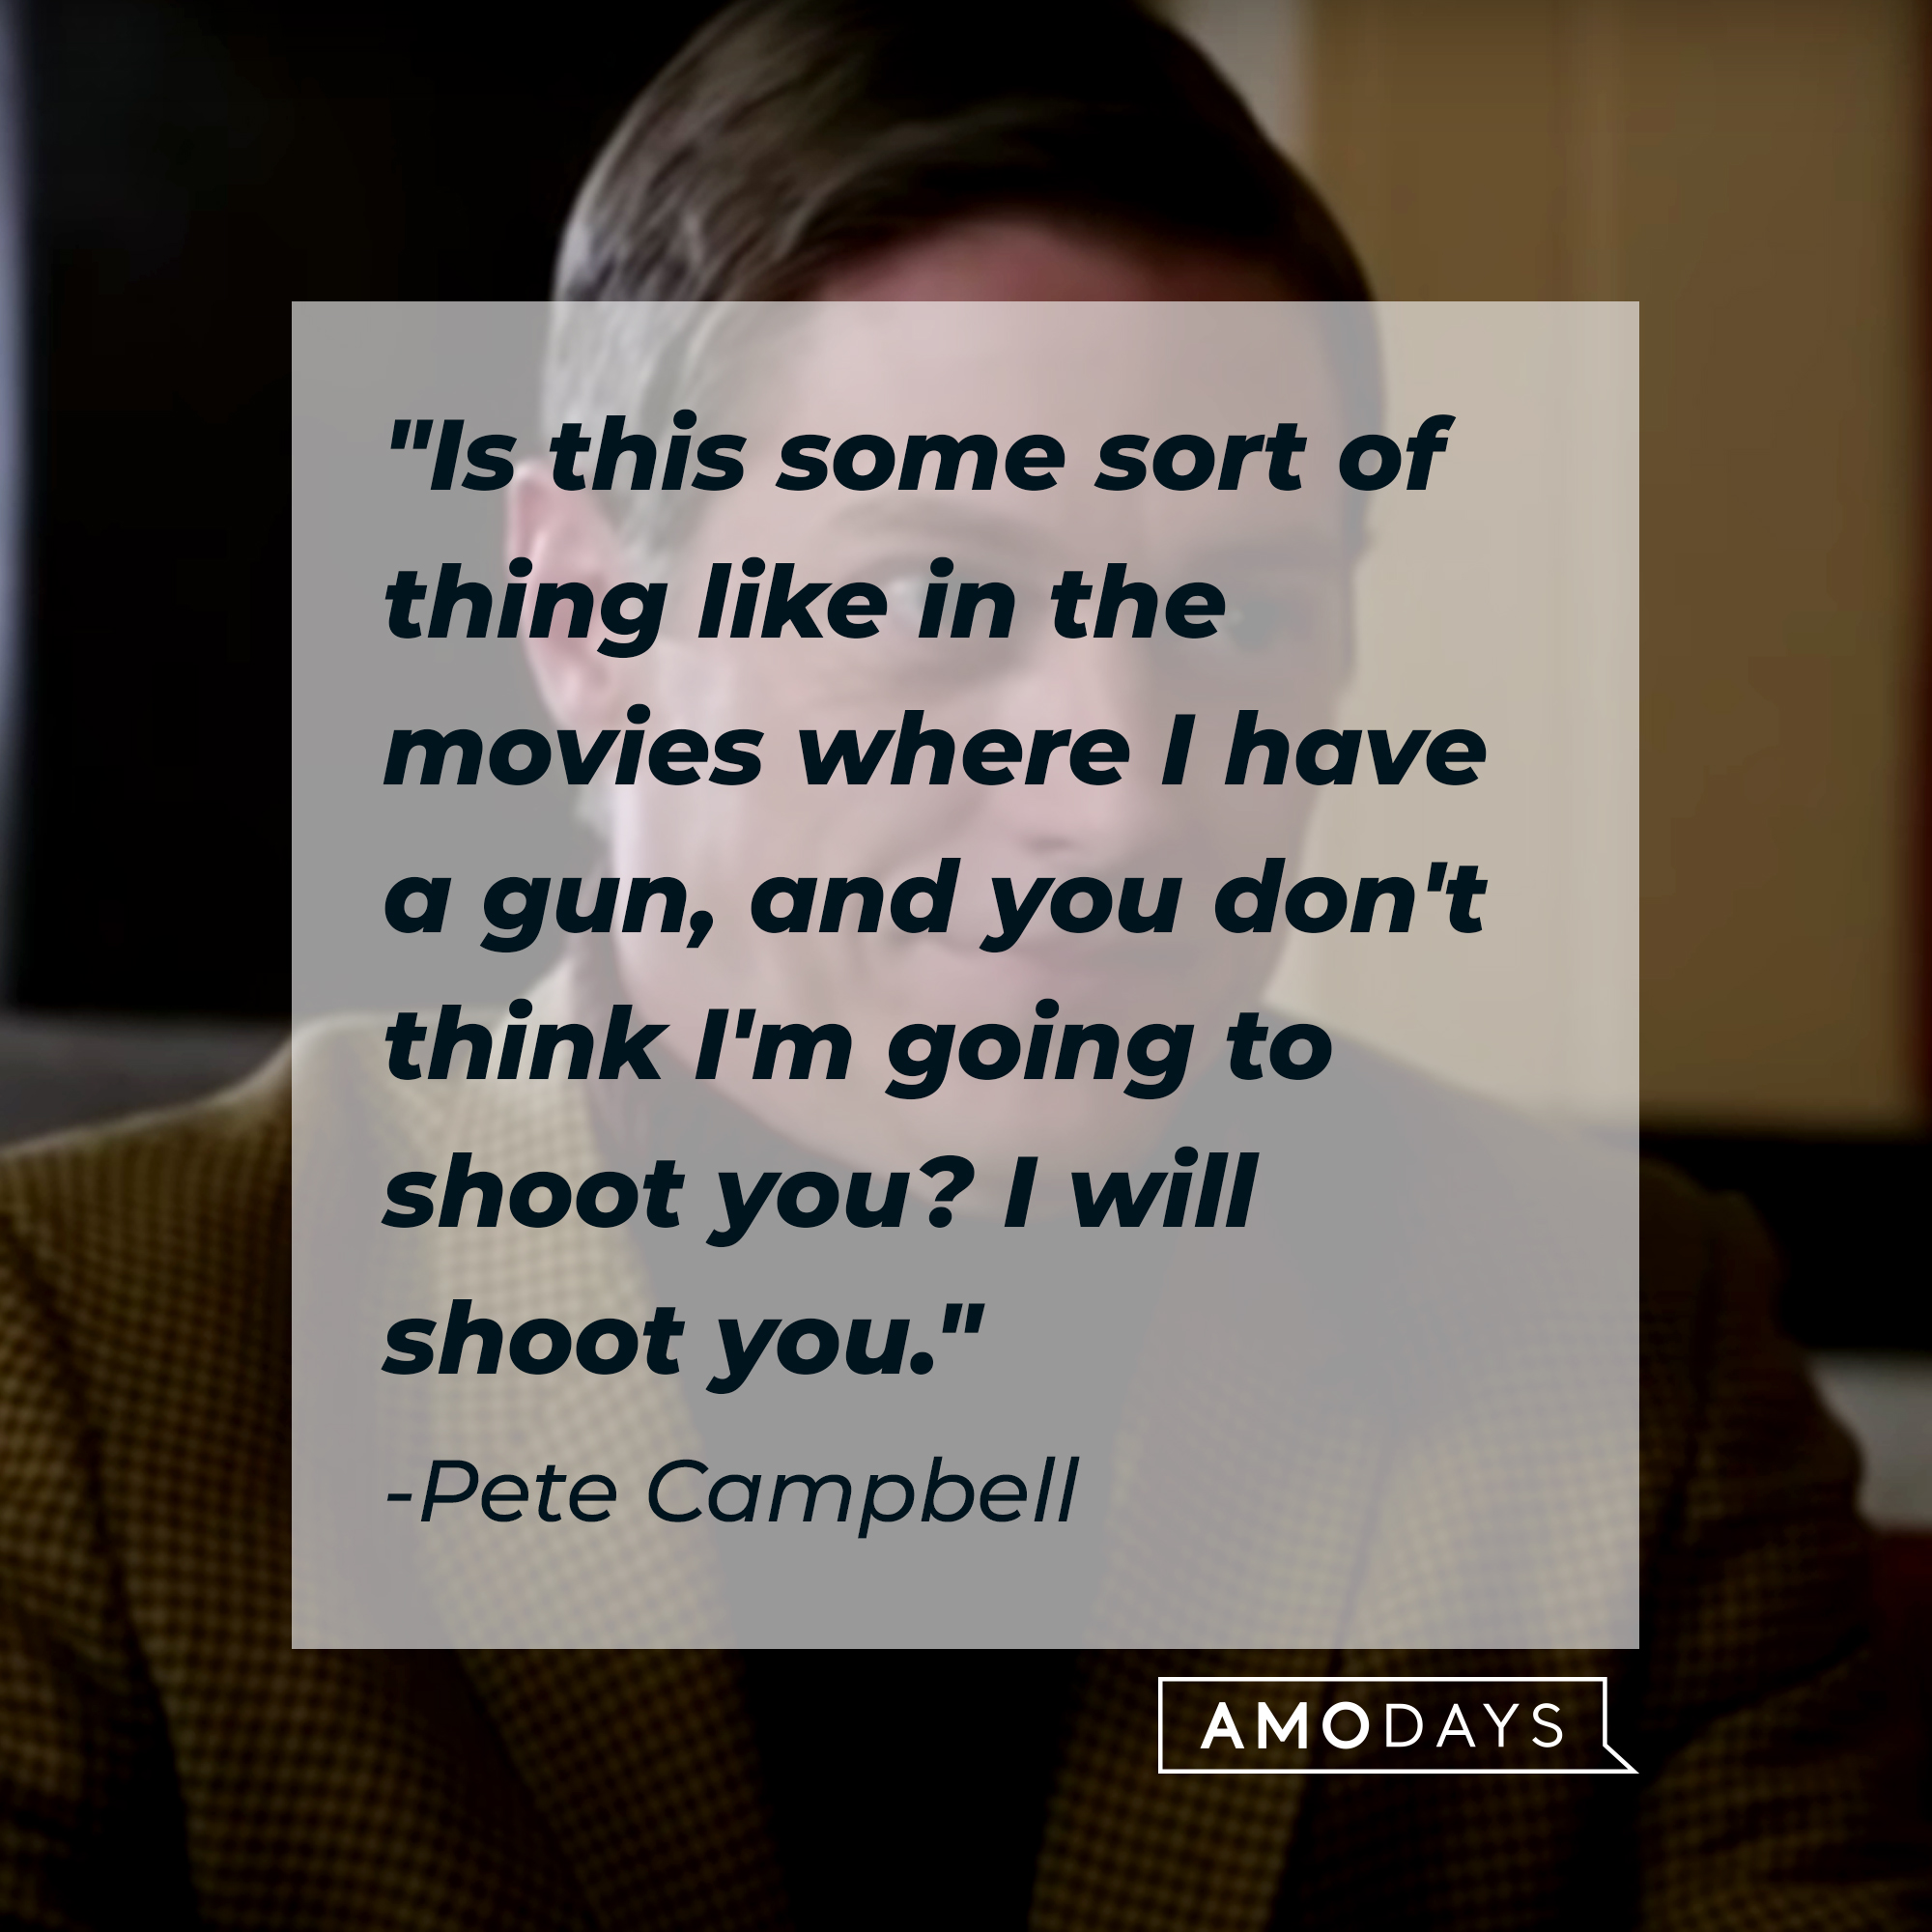 Pete Campbell's quote: "Is this some sort of thing like in the movies where I have a gun, and you don't think I'm going to shoot you? I will shoot you." | Source: Facebook.com/MadMen